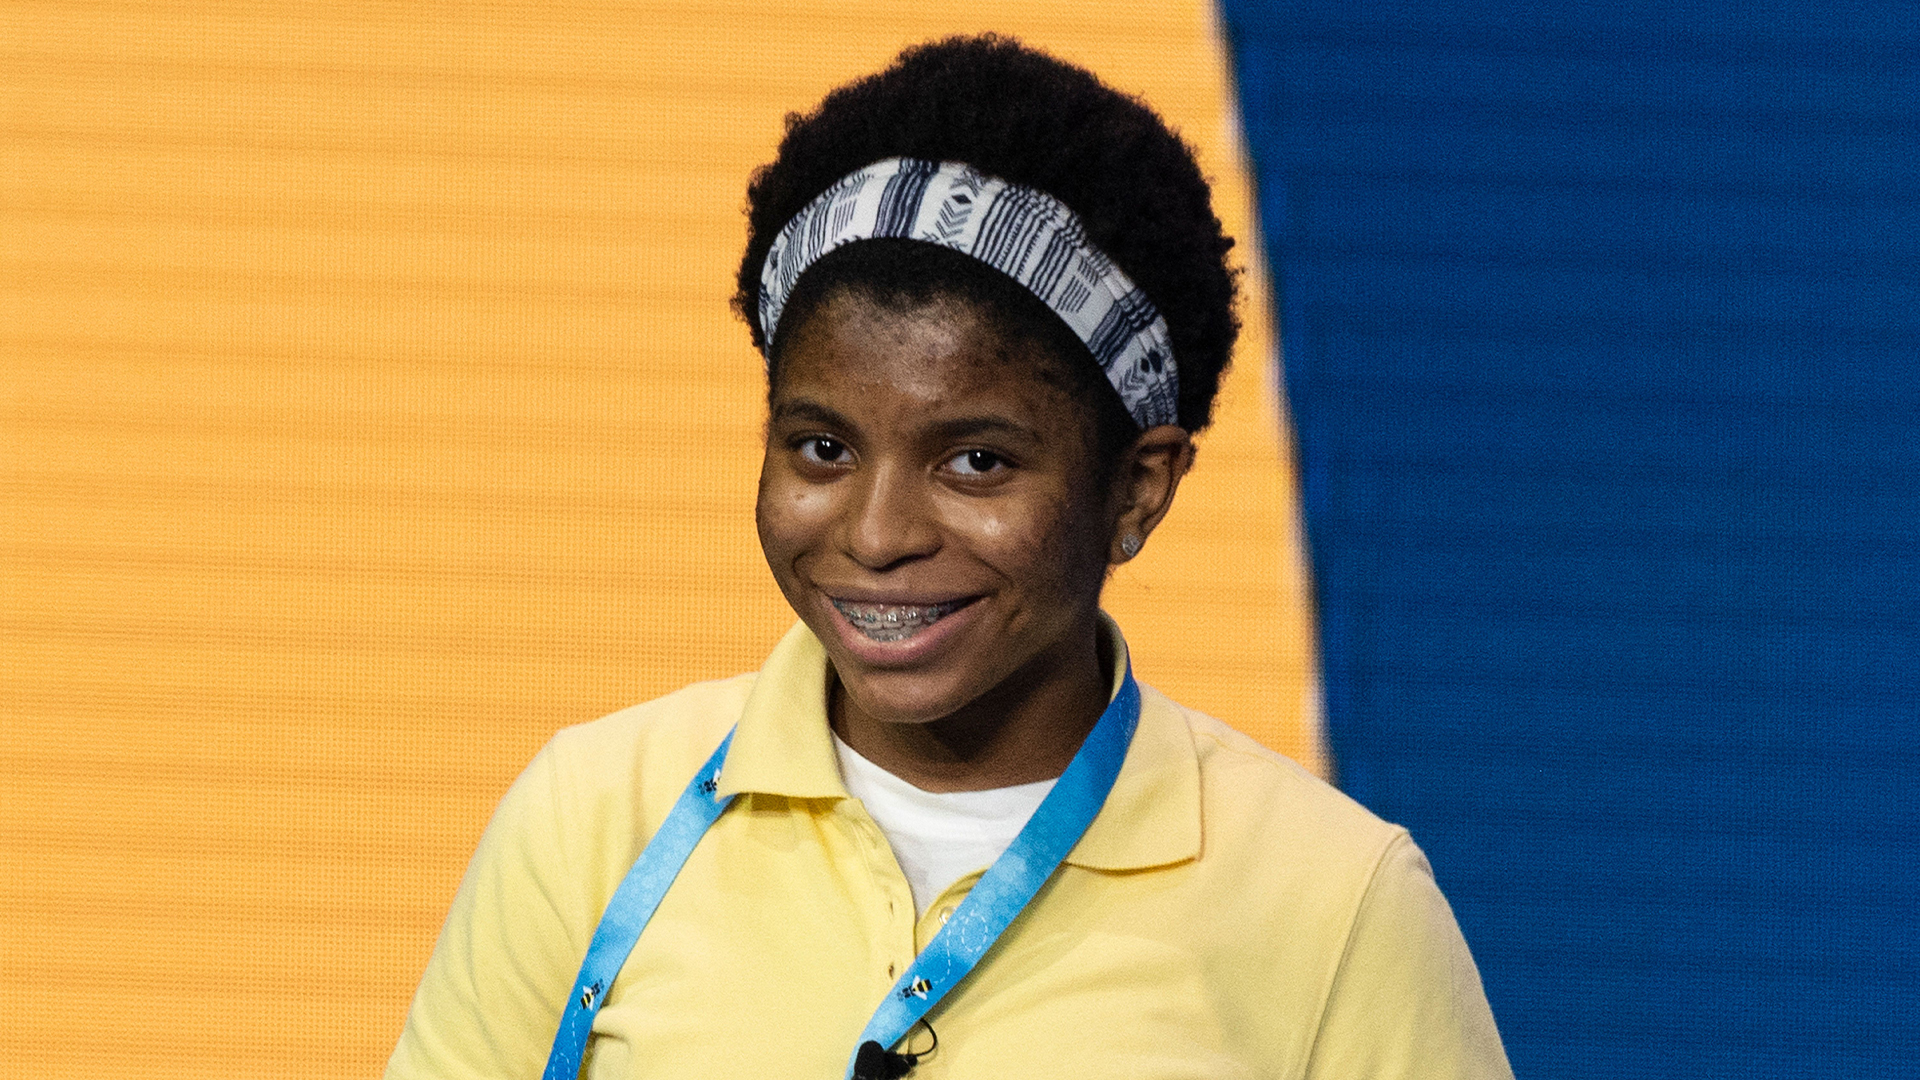 14-Year-Old Basketball Prodigy Becomes The First African American National Spelling Bee Champion